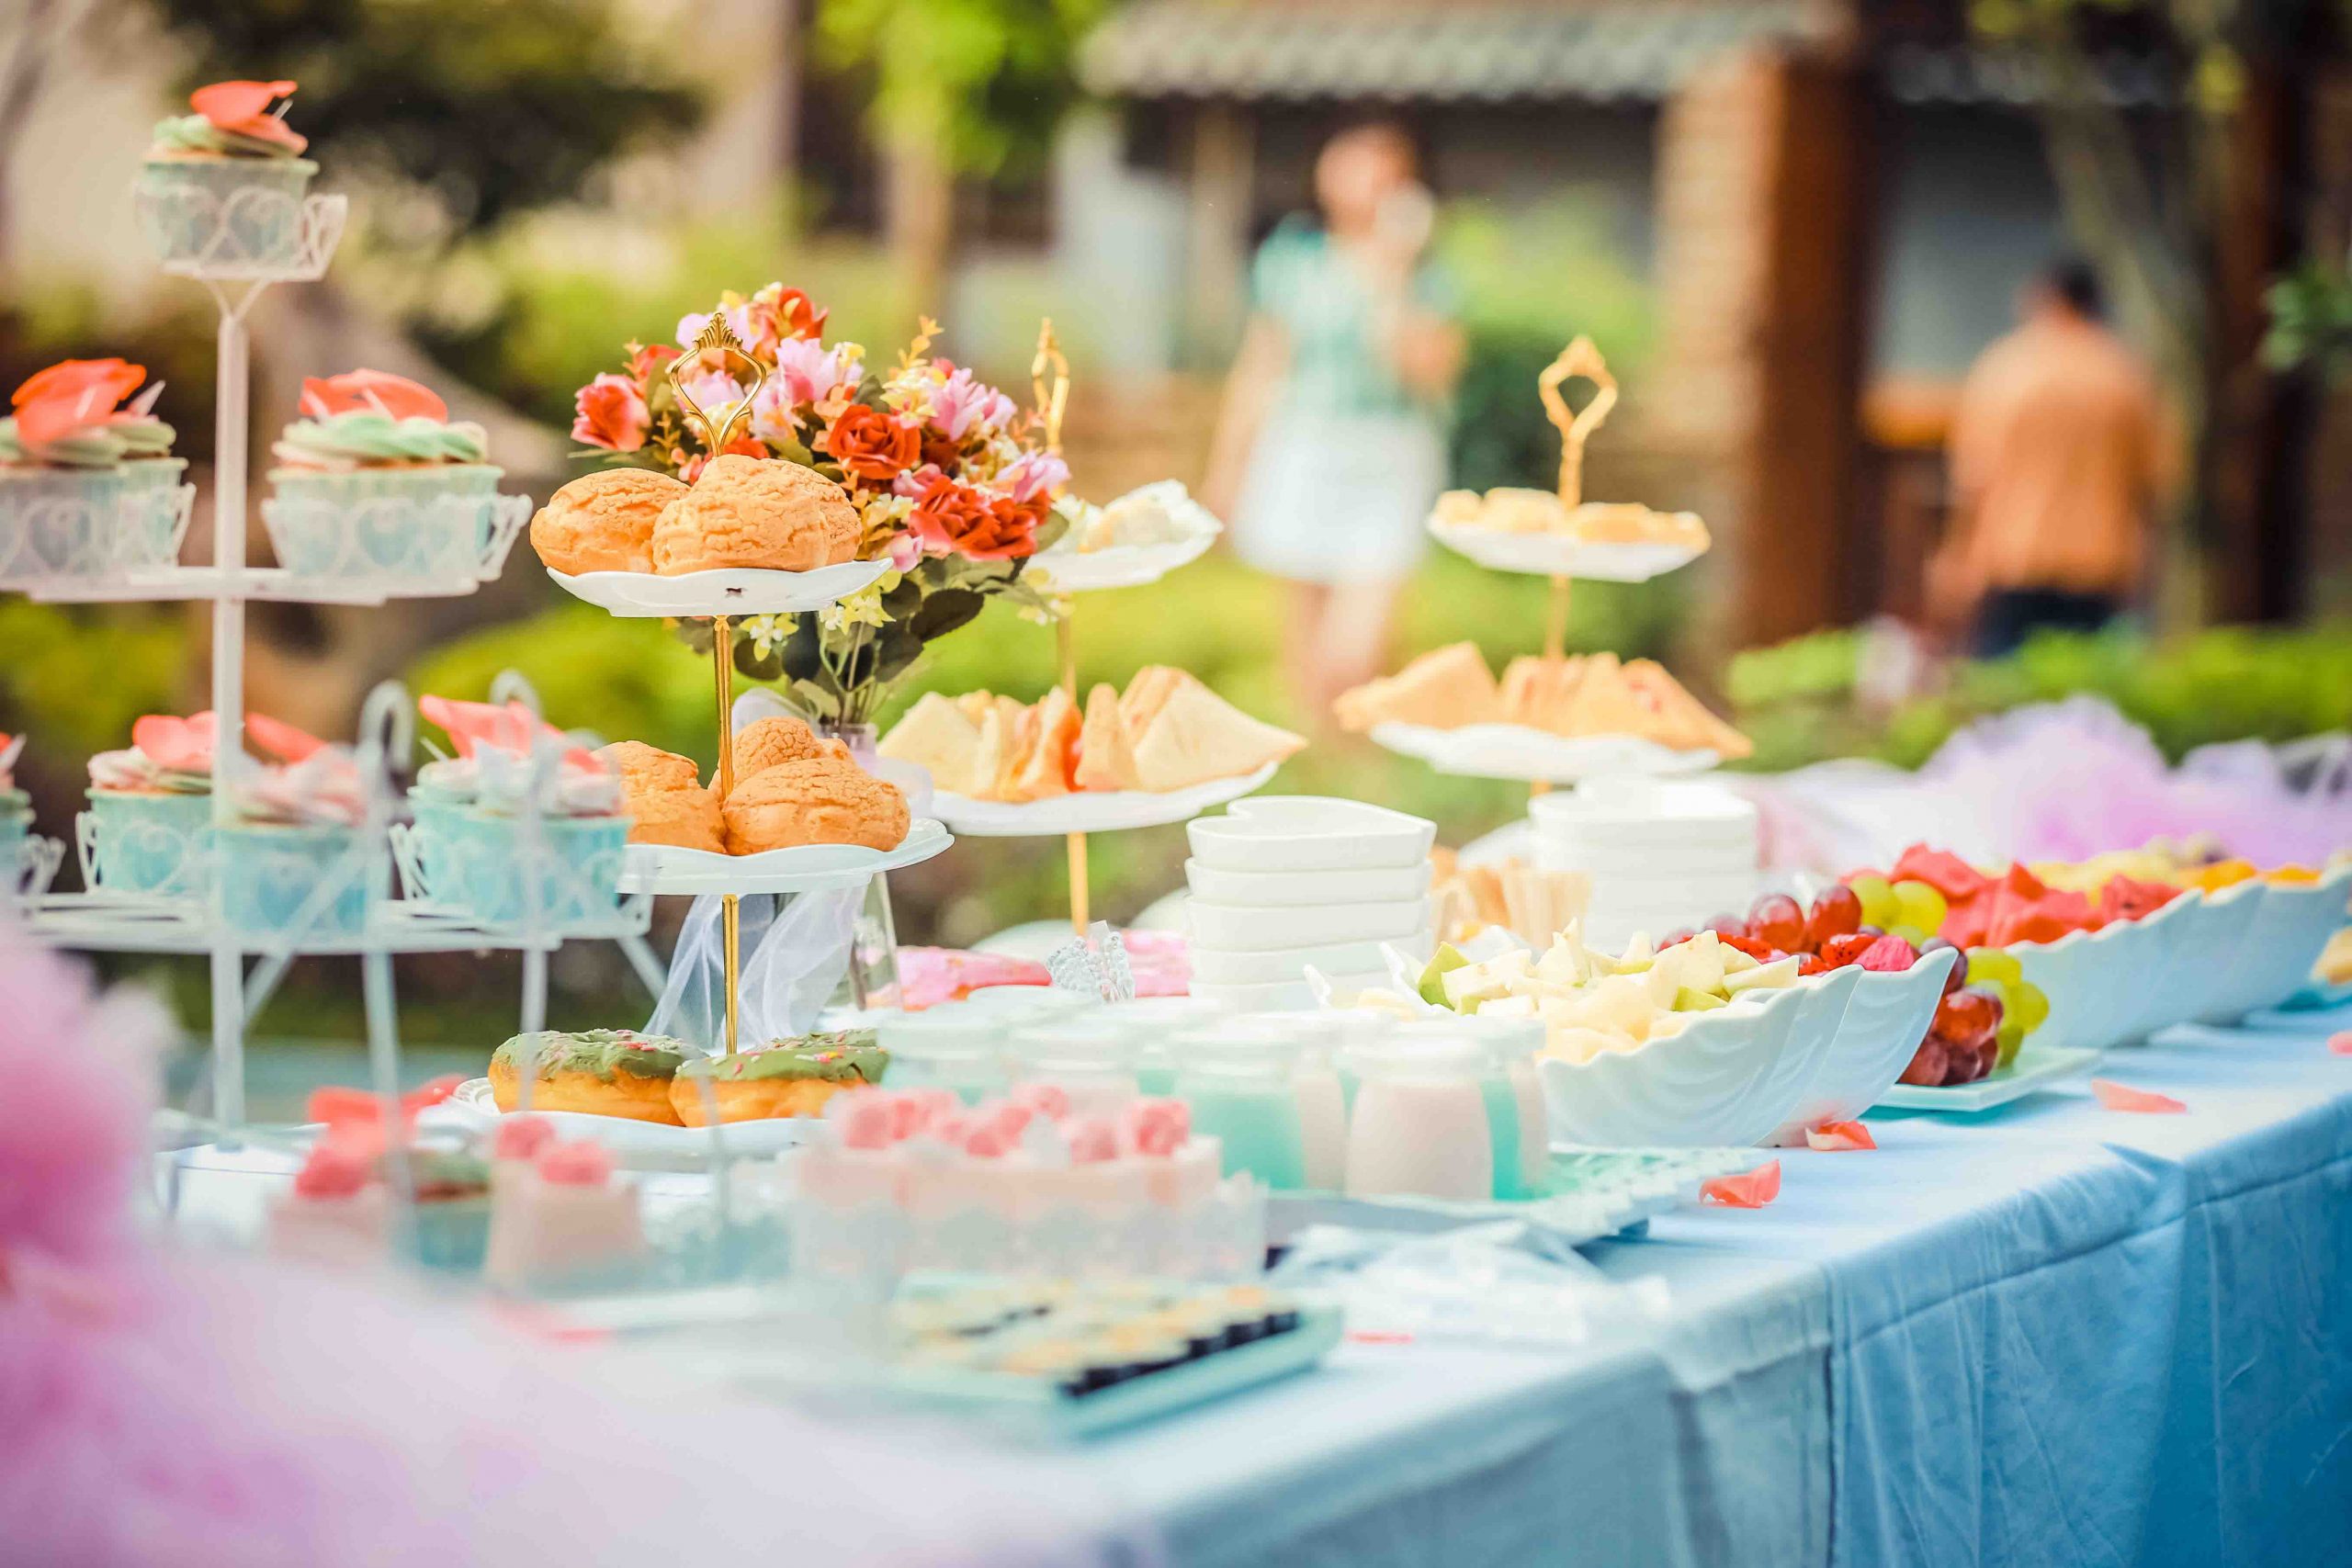 How to Throw a Great Baby Shower?